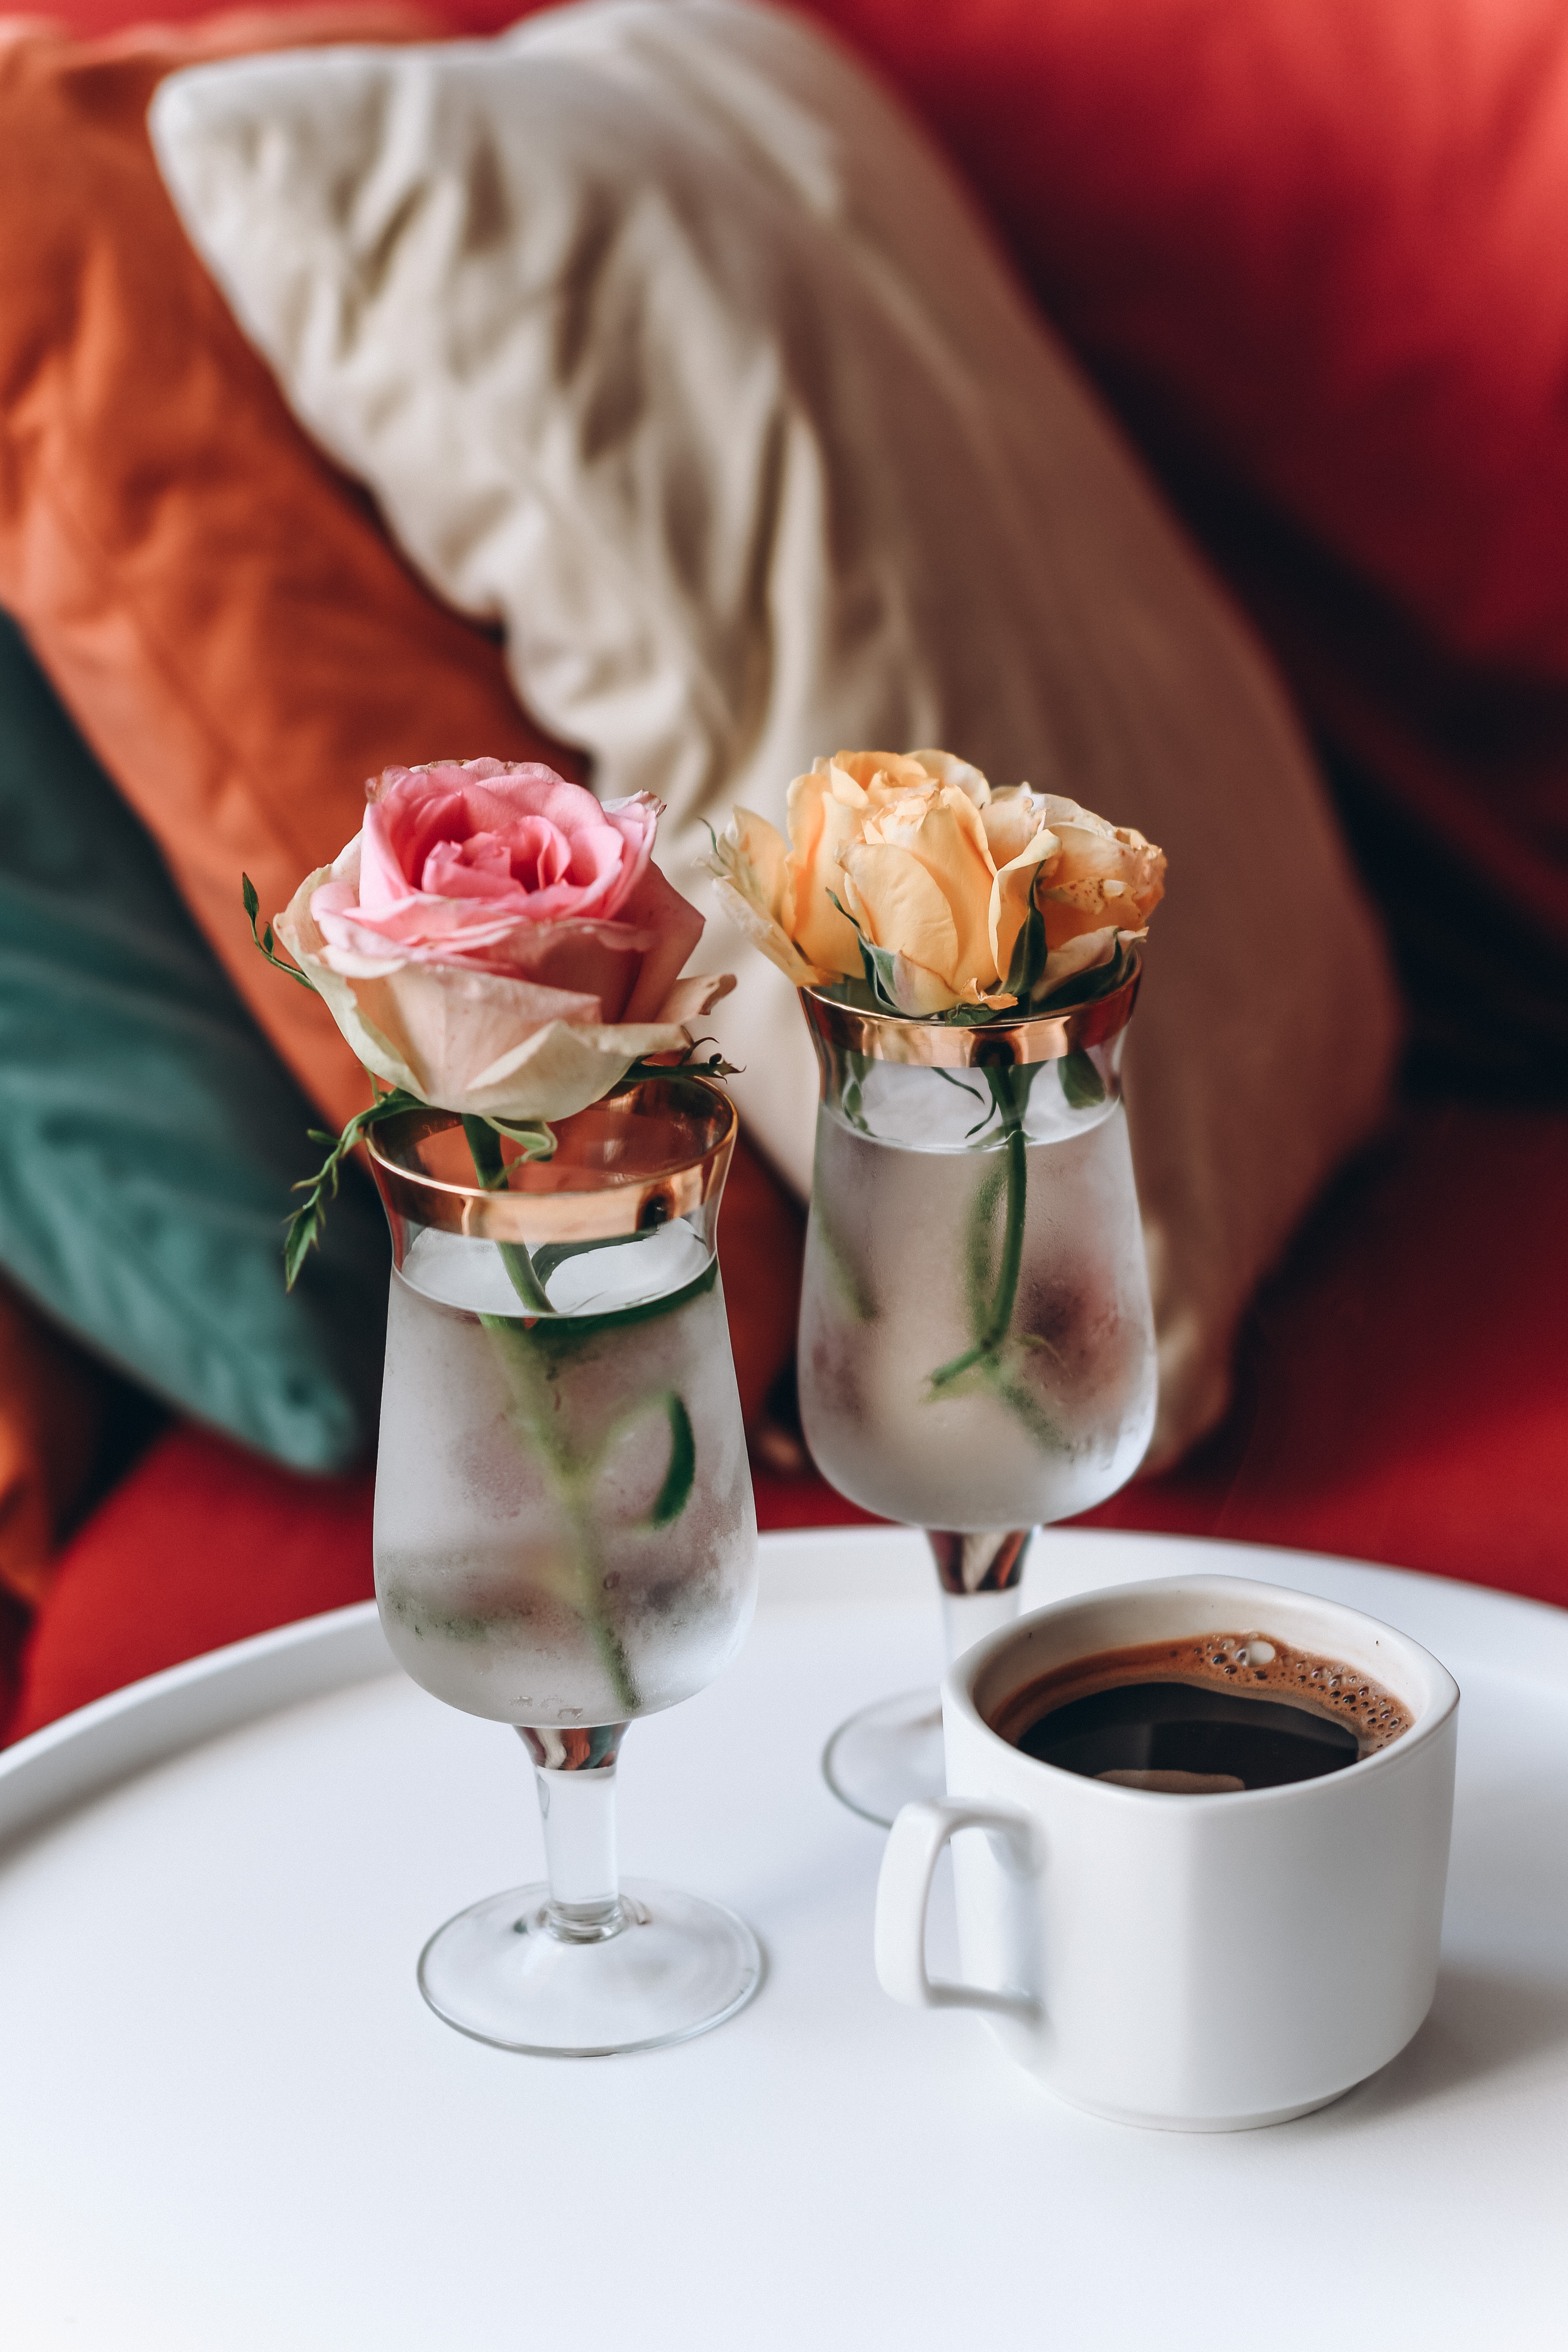 Cool Wallpapers coffee, flower, miscellanea, miscellaneous, rose flower, rose, cup, glasses, goblets